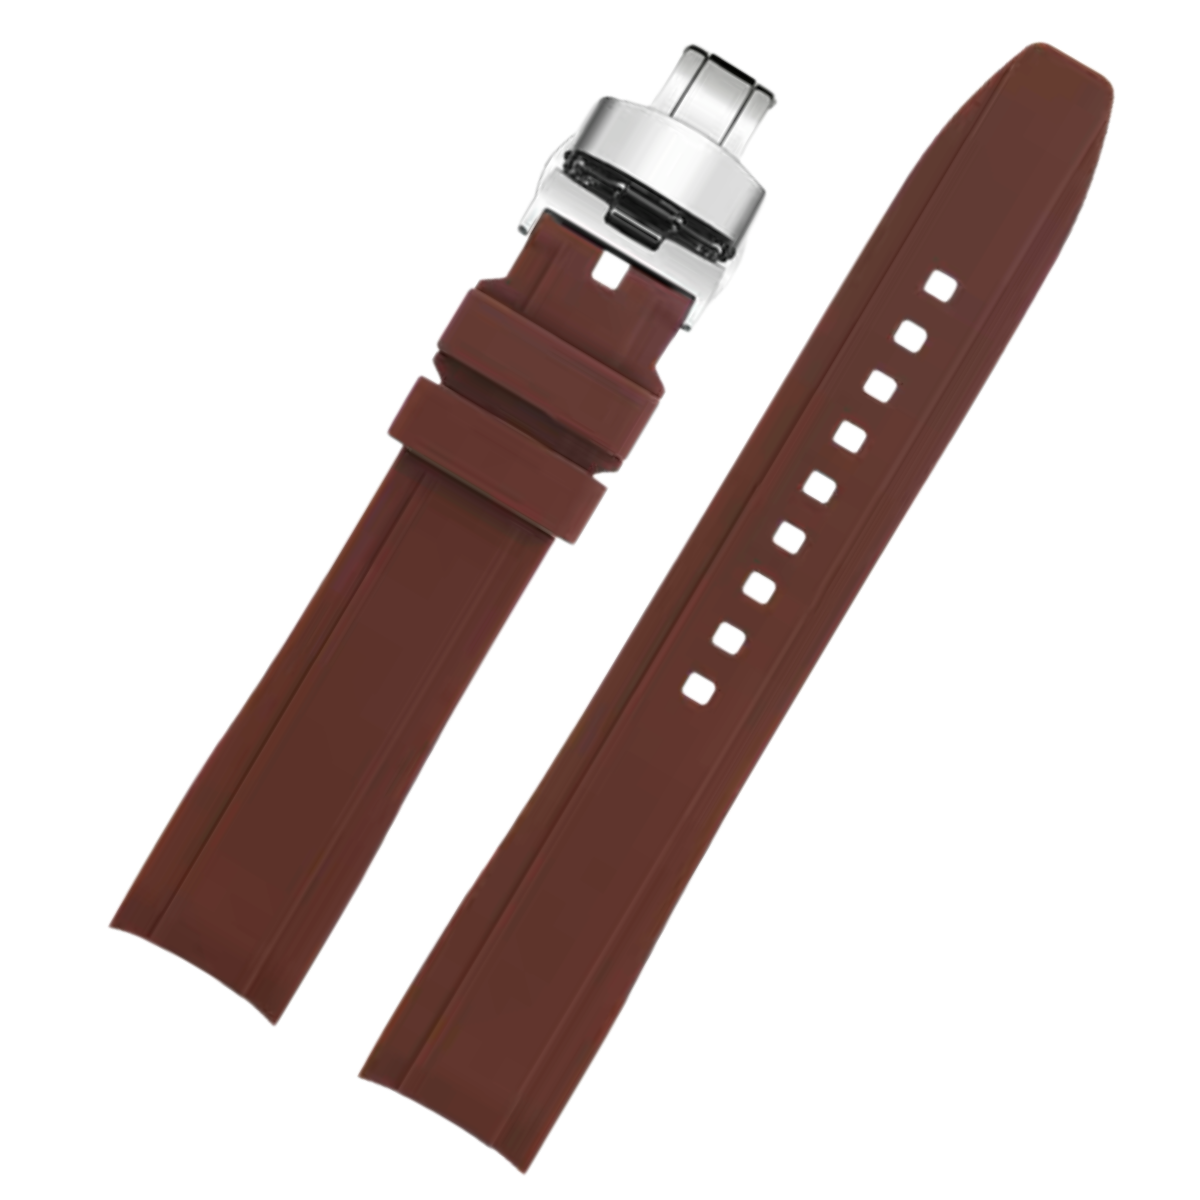 Dexter Silicone Curved Lug End Strap Brown (Silver Deployment Clasp) (Rolex Replacement)